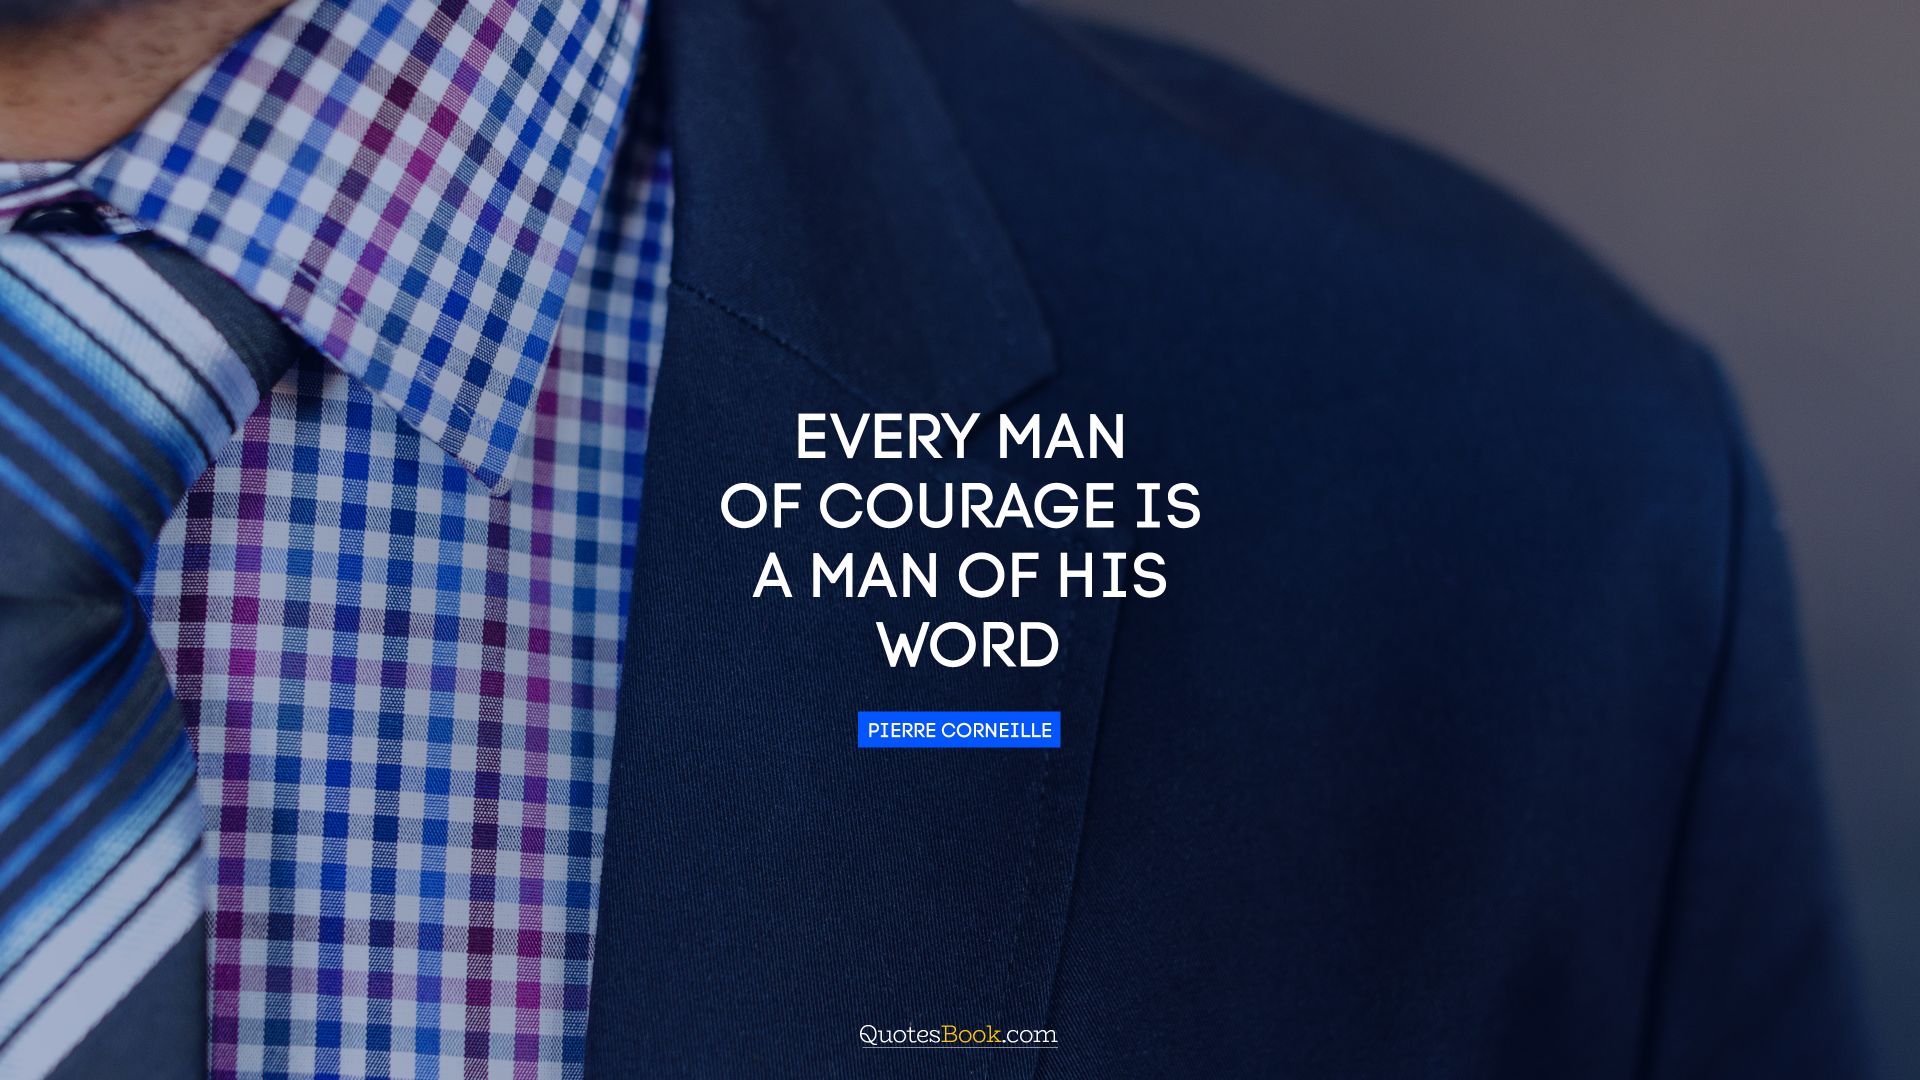 Every man of courage is a man of his word. - Quote by Pierre Corneille